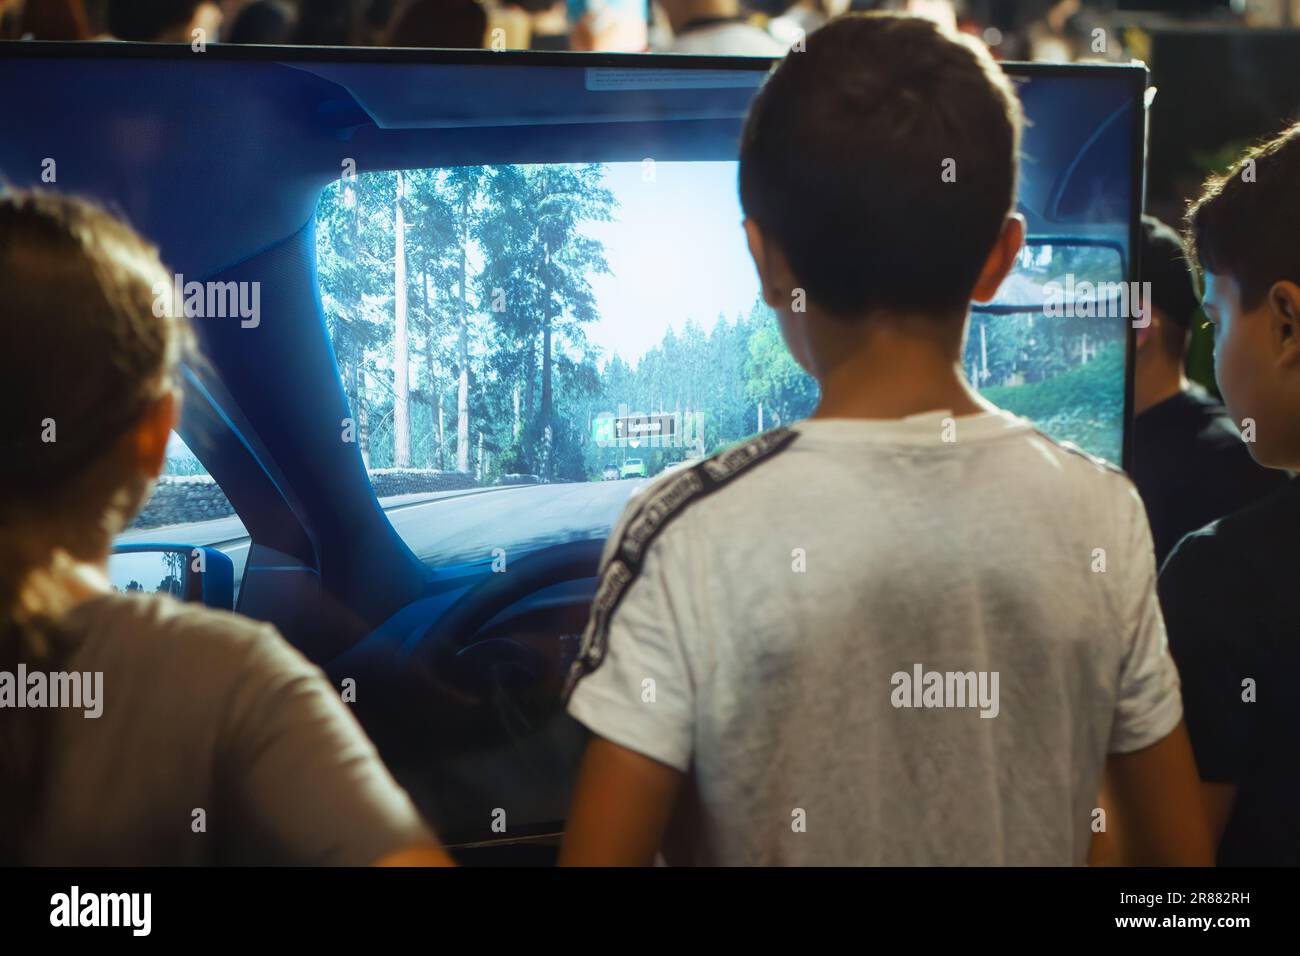 A group of young children playing a racing car computer game displayed on a big digital screen Stock Photo